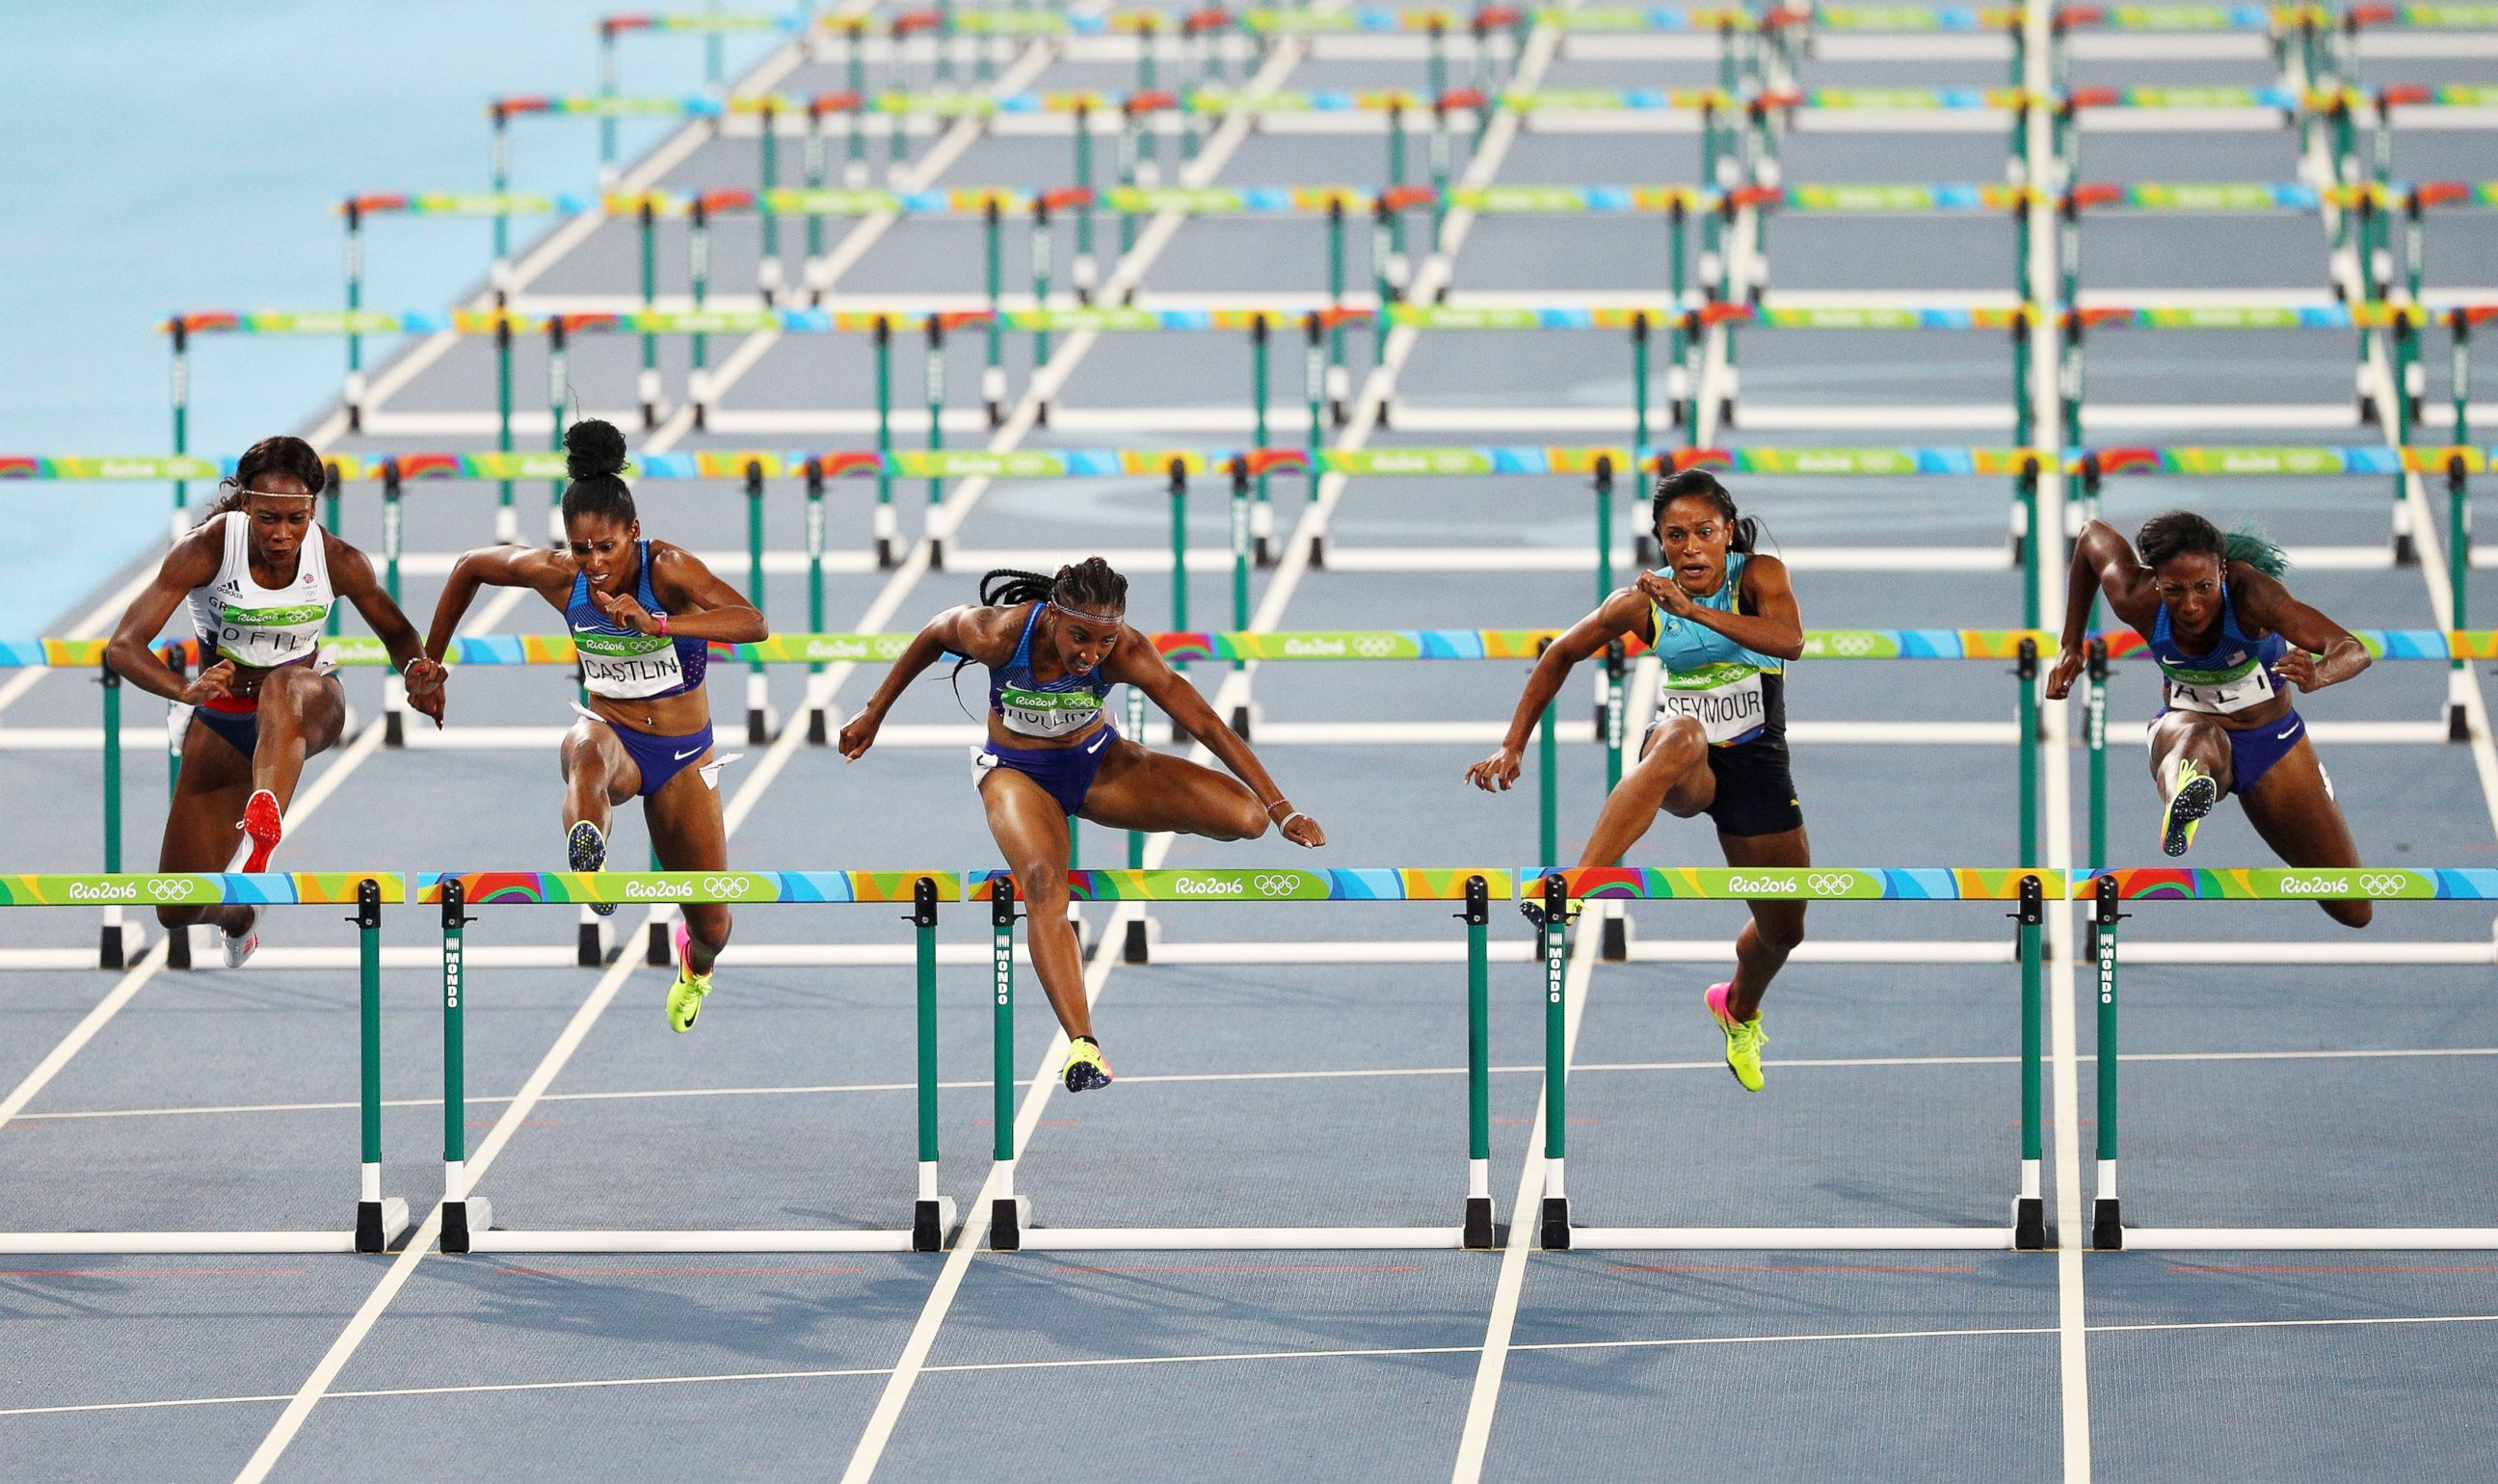 PHOTO: Brianna Rollins of the United States (C) competes on her way to winning the gold medal in the Women's 100m Hurdles Final ahead of silver medalist Nia Ali of the United States and bronze medalist Kristi Castlin of the United States